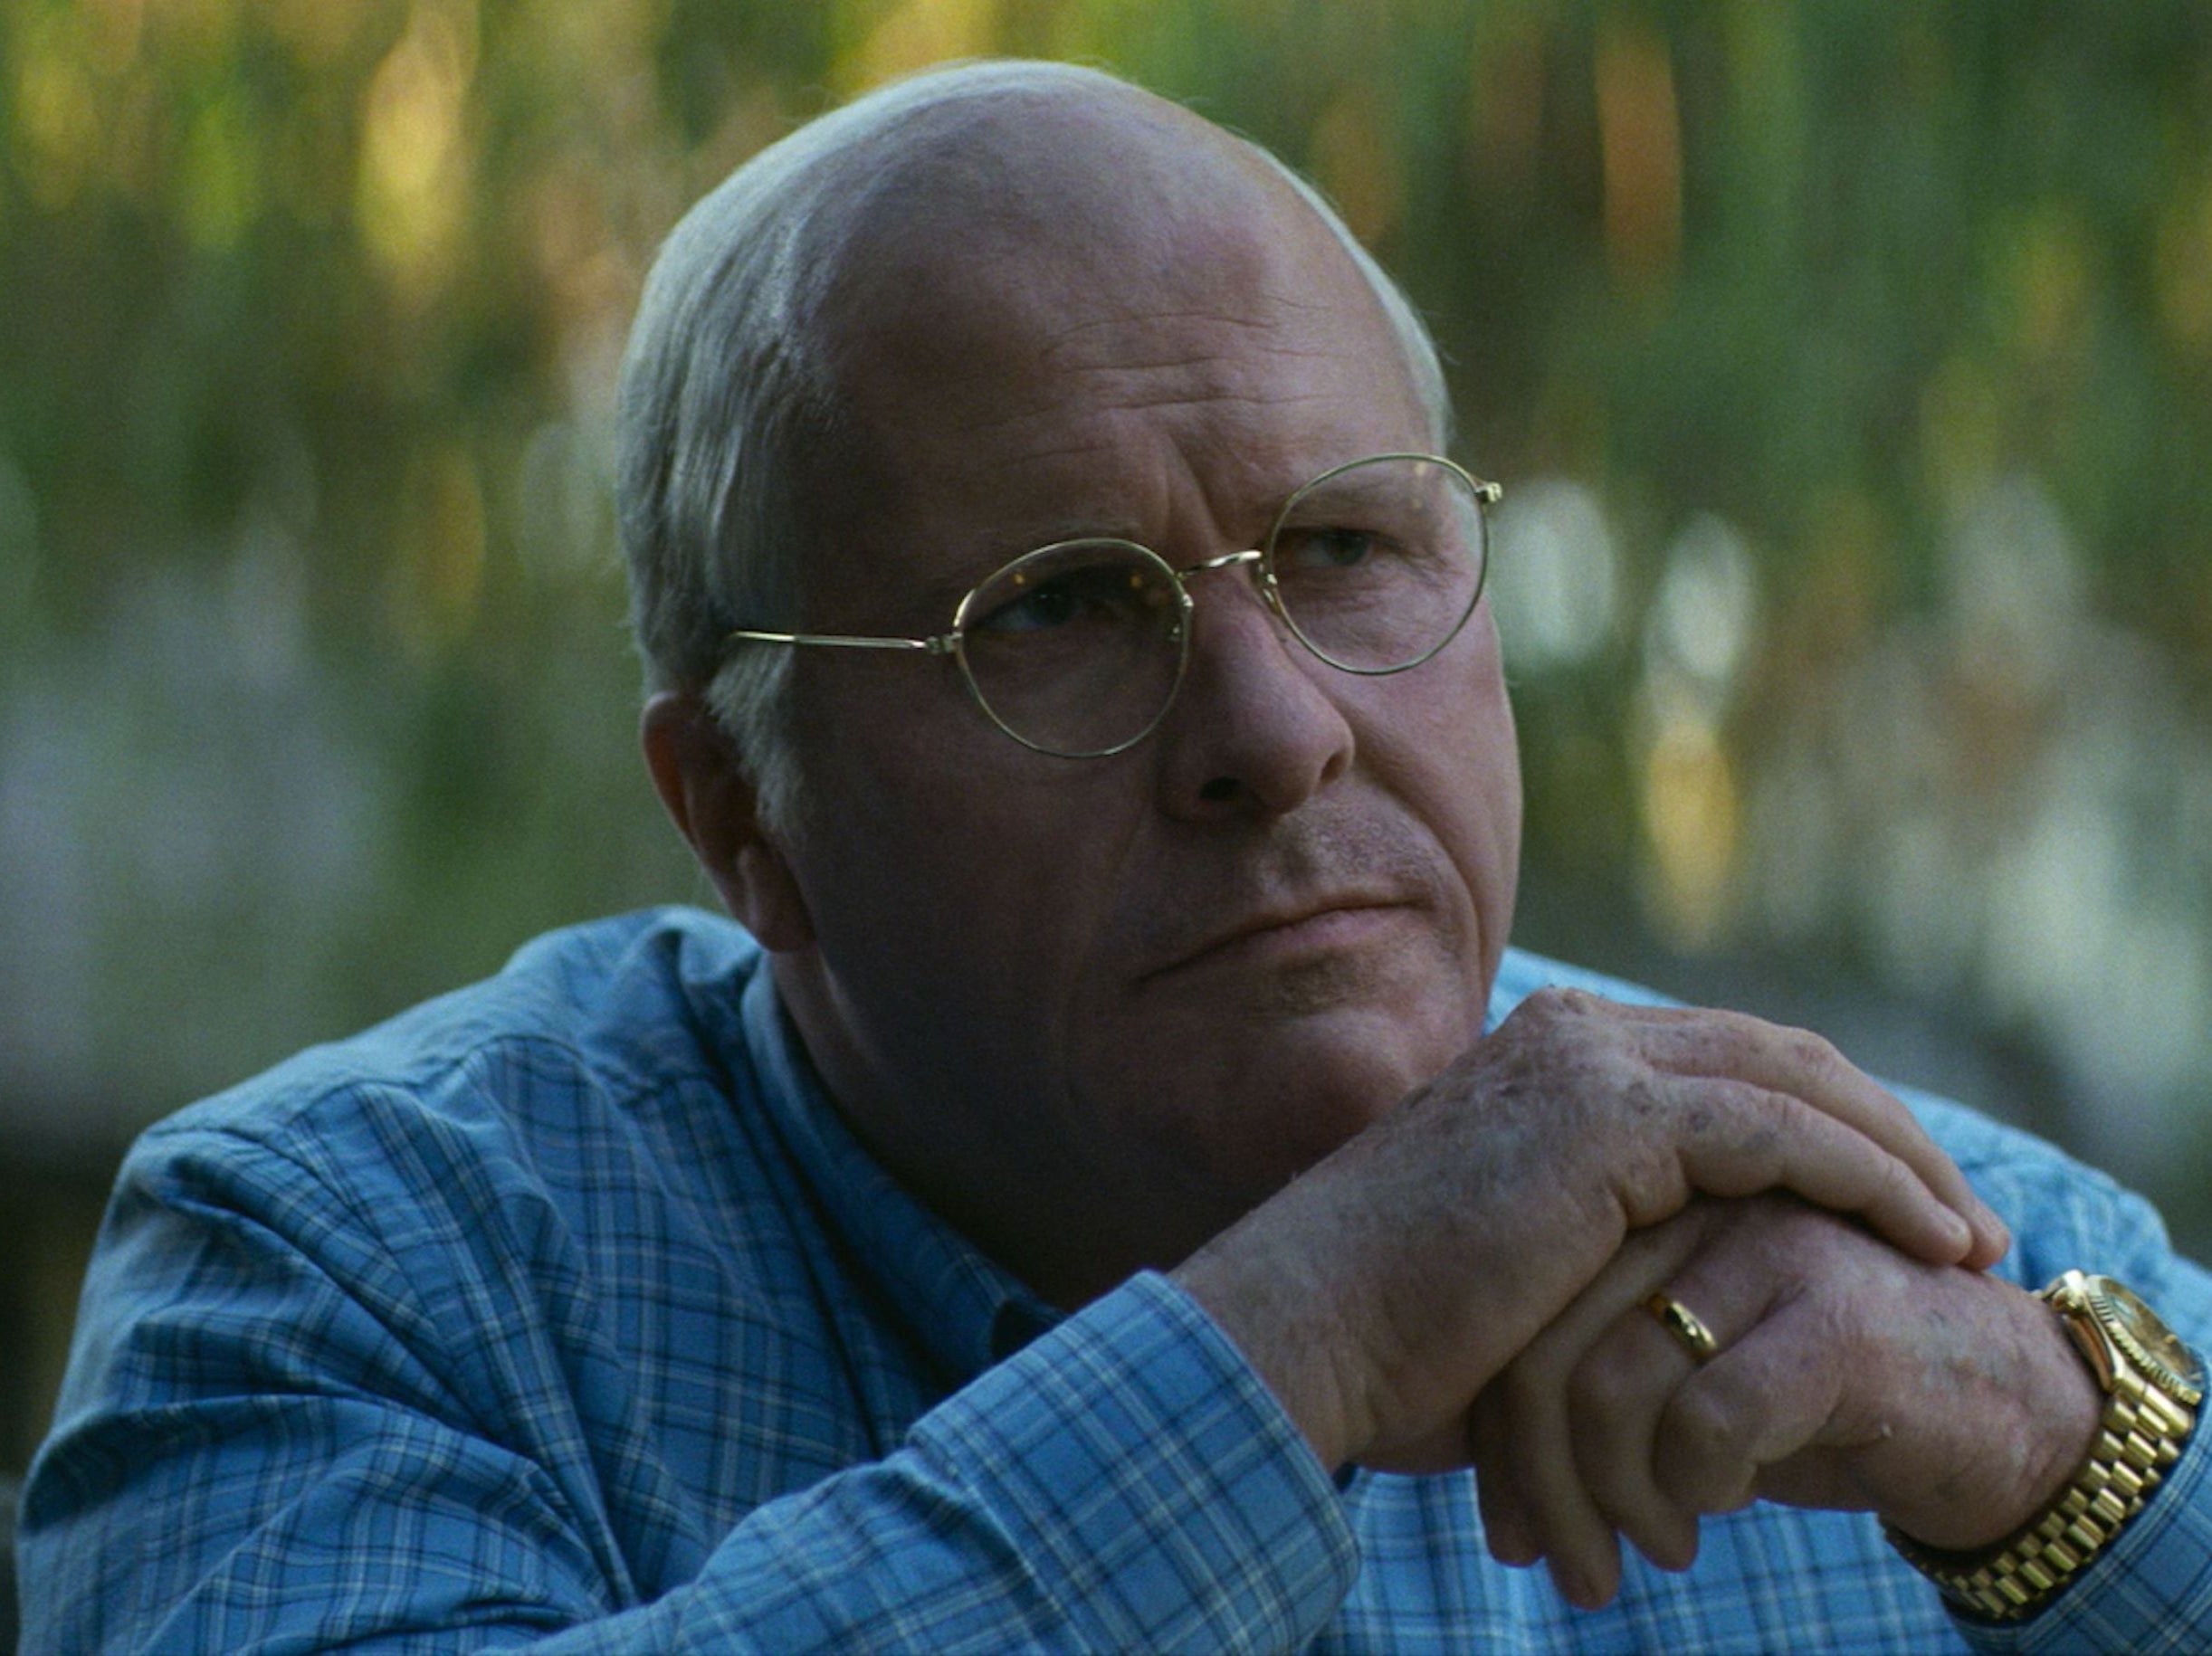 Christian Bale as Dick Cheney in ‘Vice’